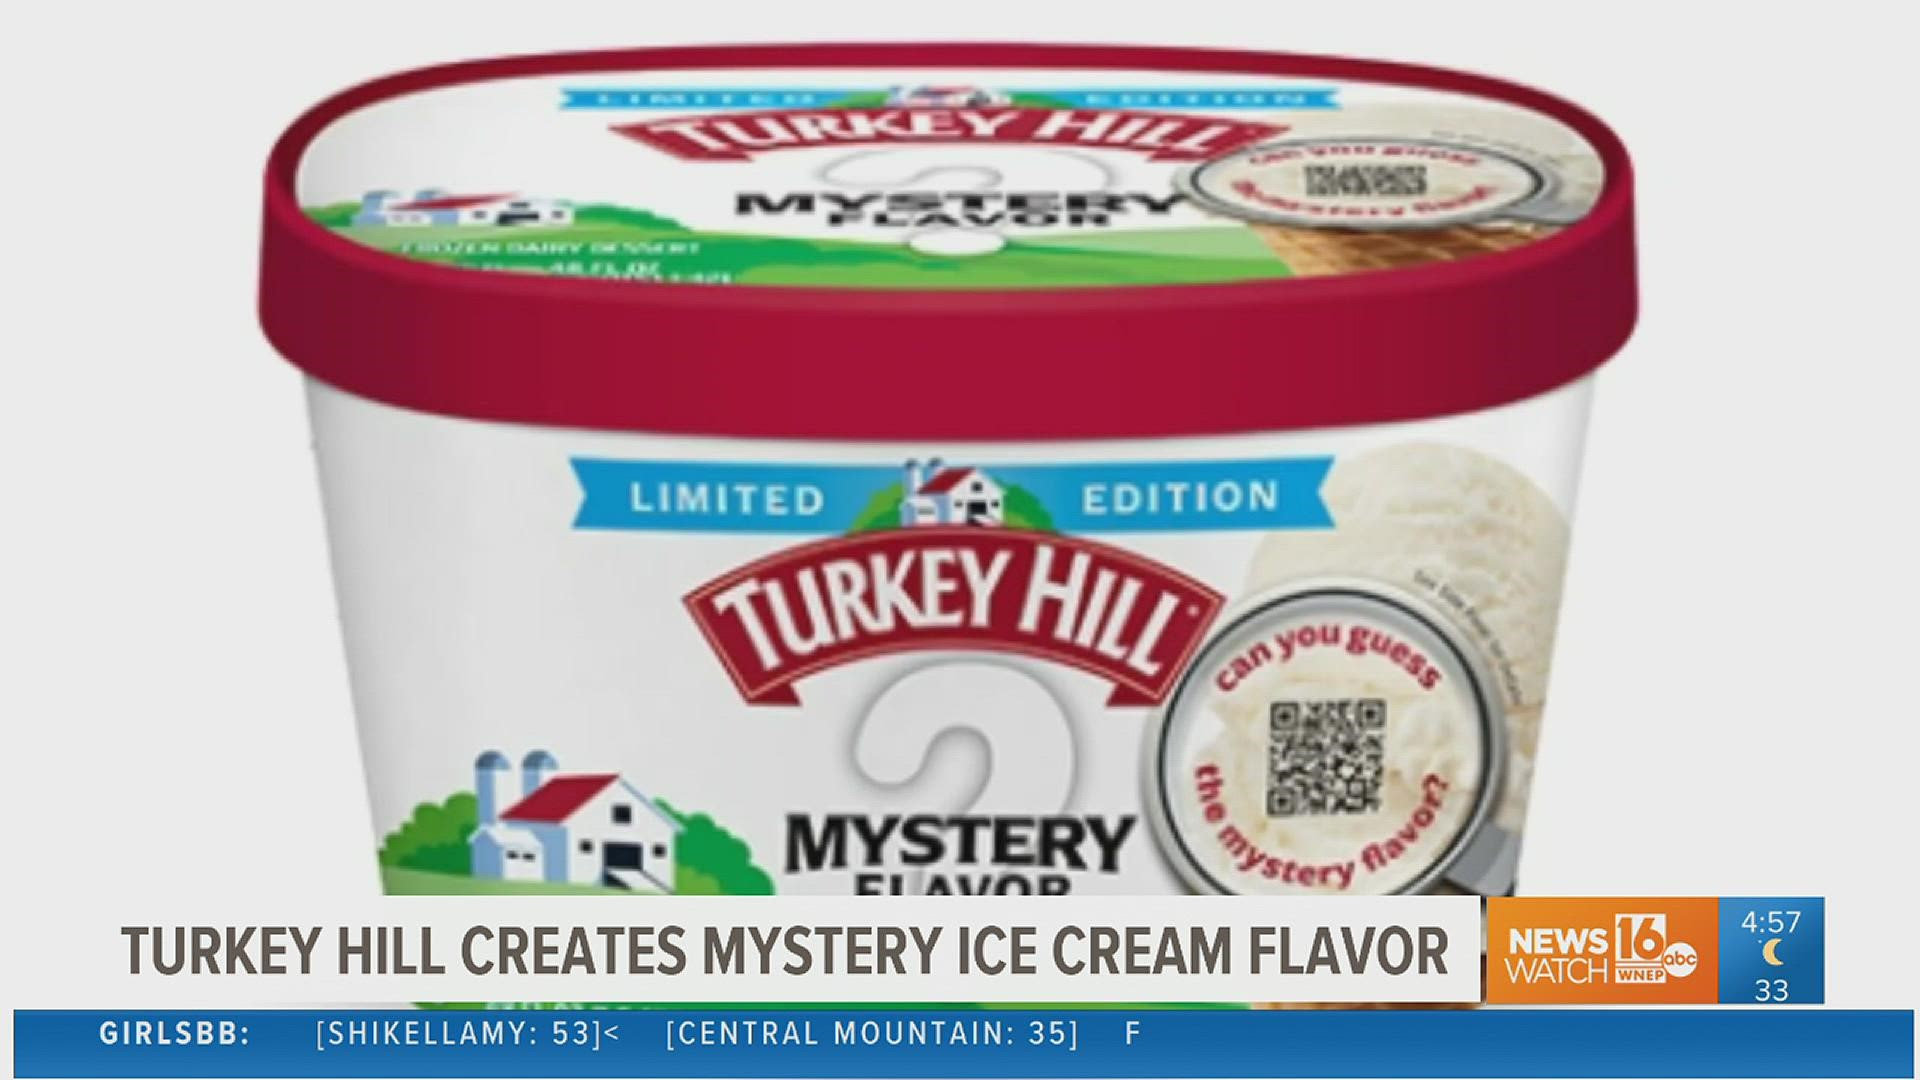 Do you want the chance to win free ice cream for life? Turkey Hill wants to test your taste buds.